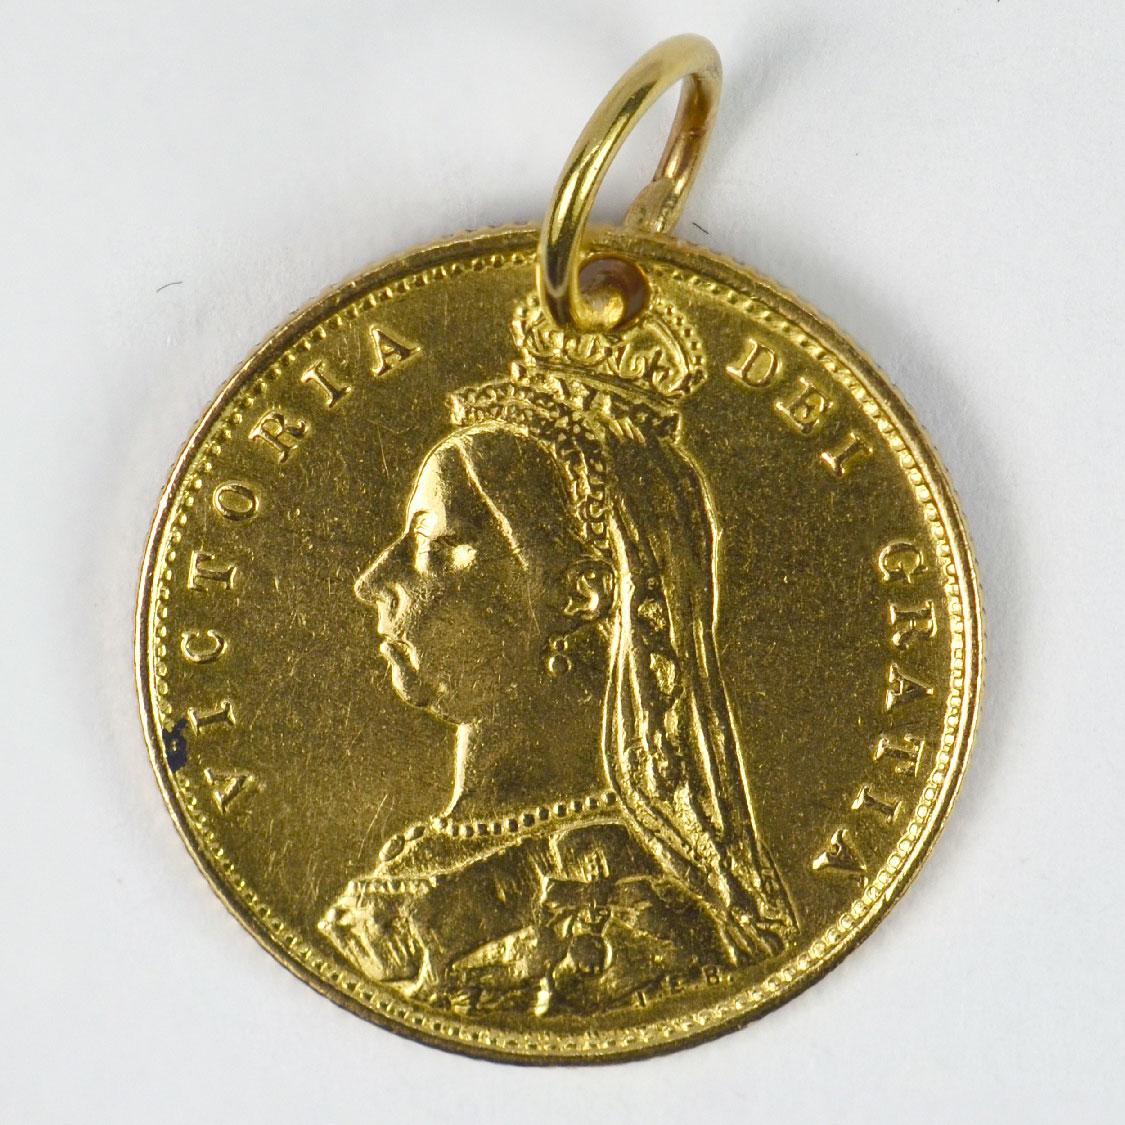 An 18 karat (18K) yellow gold charm pendant designed as a coin holder containing a 22 karat half sovereign dated 1887 produced for Queen Victoria’s Golden Jubilee featuring a portrait of the Queen by Joseph Edgar Boehm, to the reverse a shield.